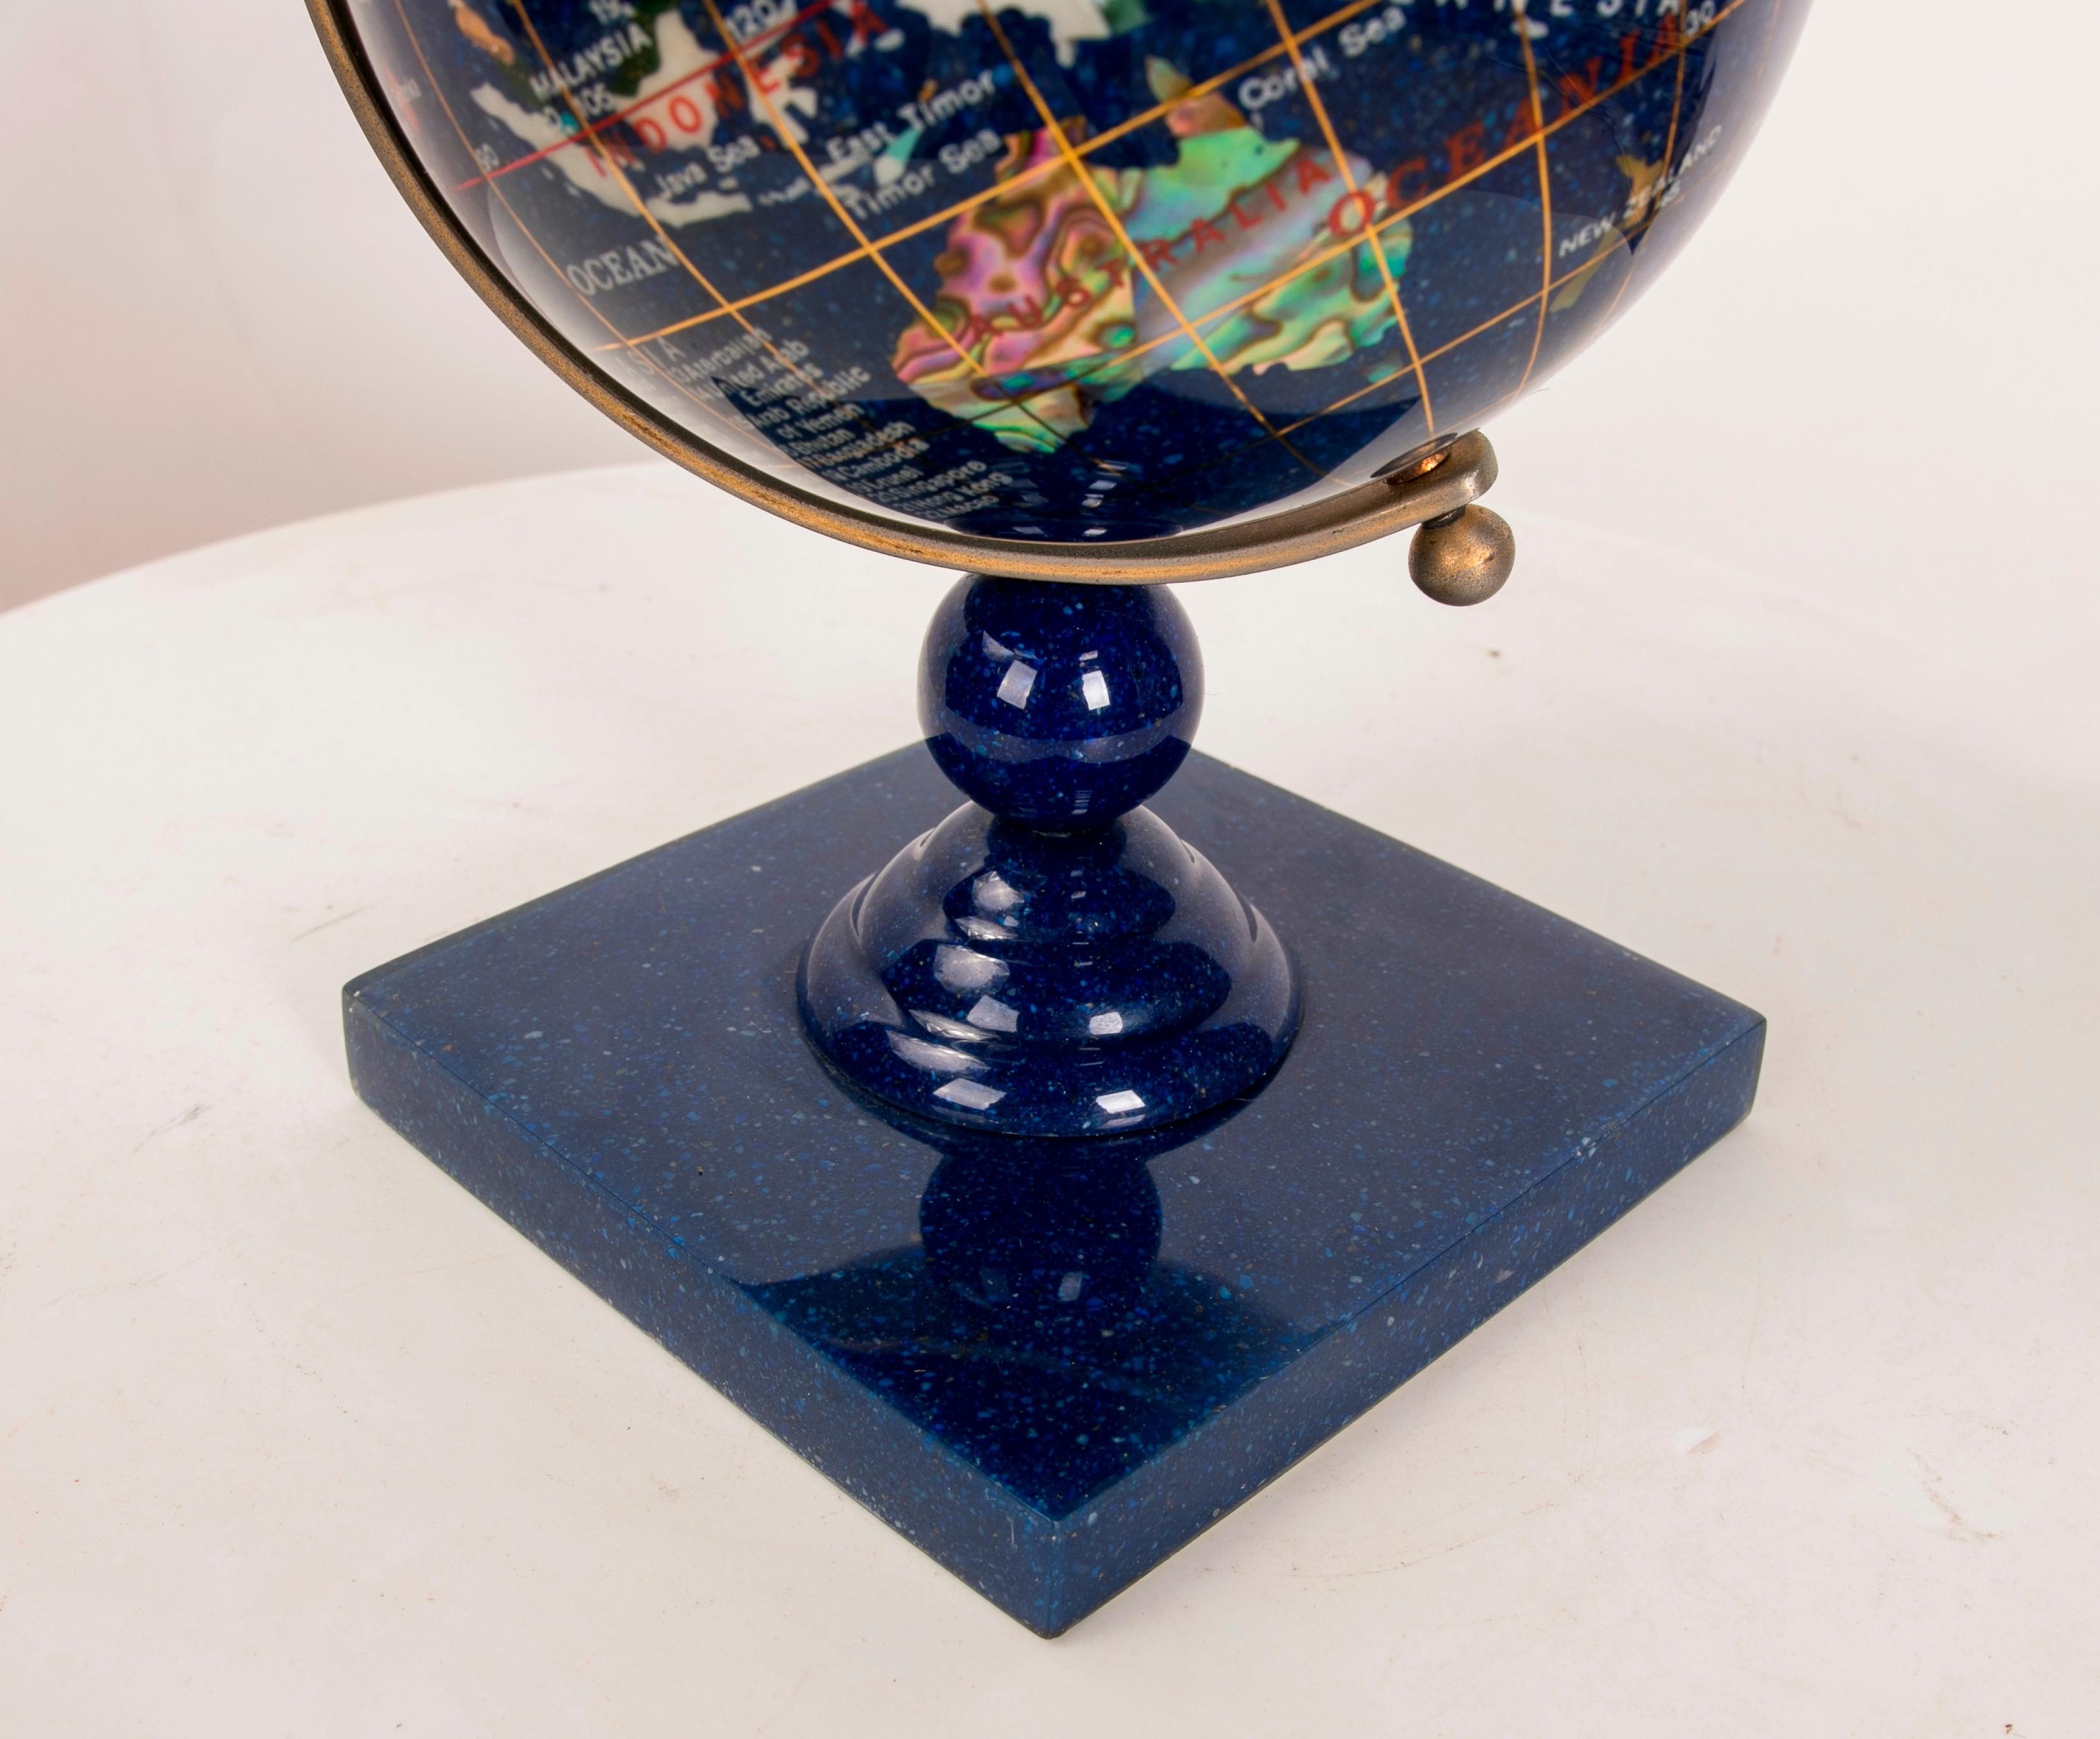 20th Century World Ball Sculpture Made of Hand-Carved Stones on a Base For Sale